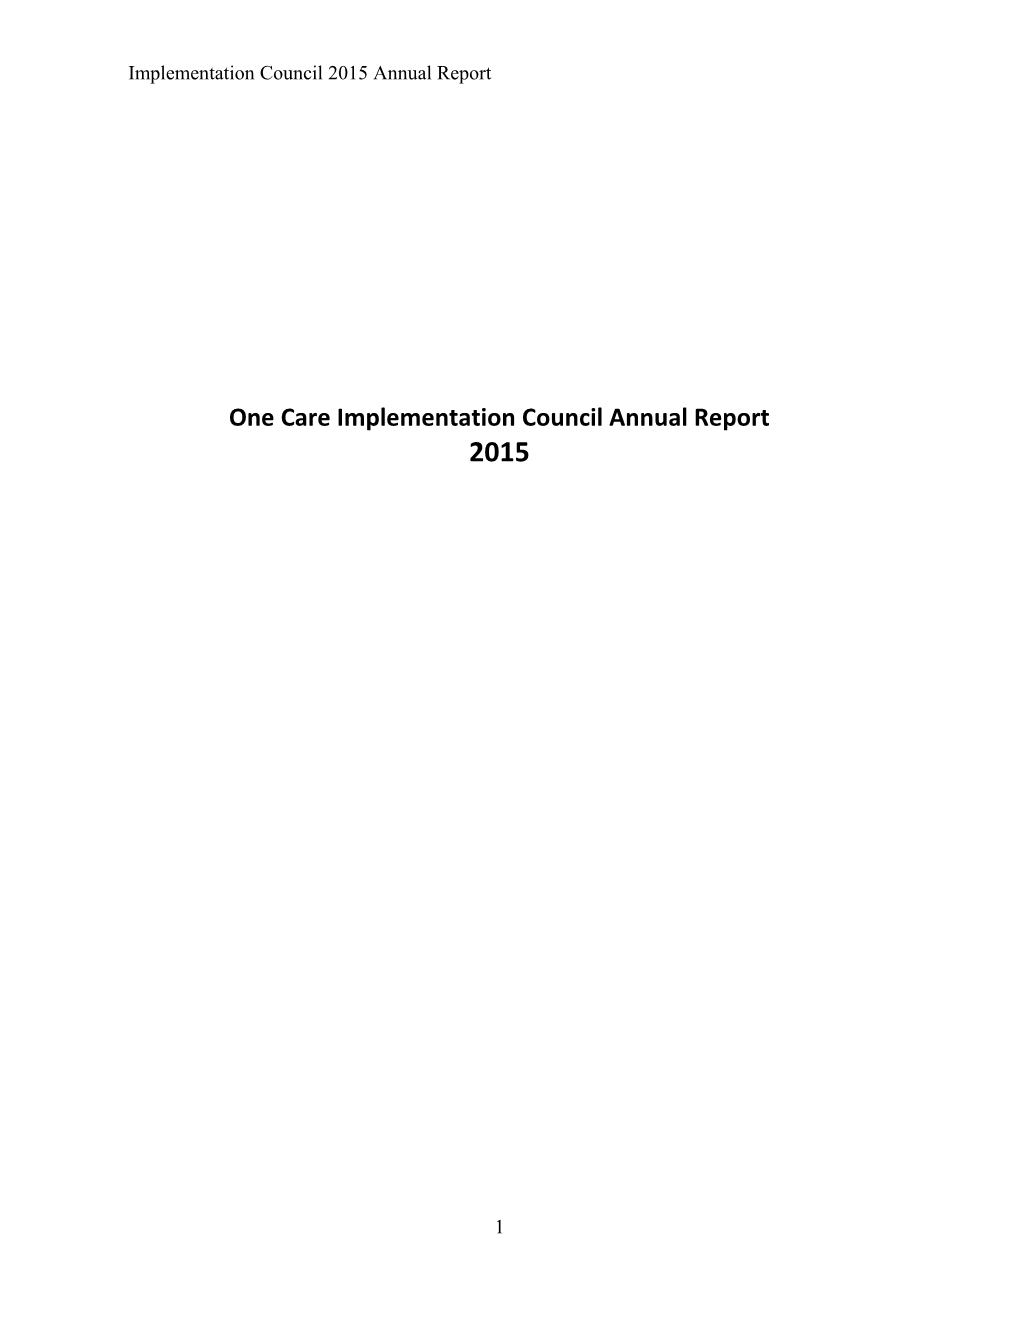 One Care Implementation Council Annual Report